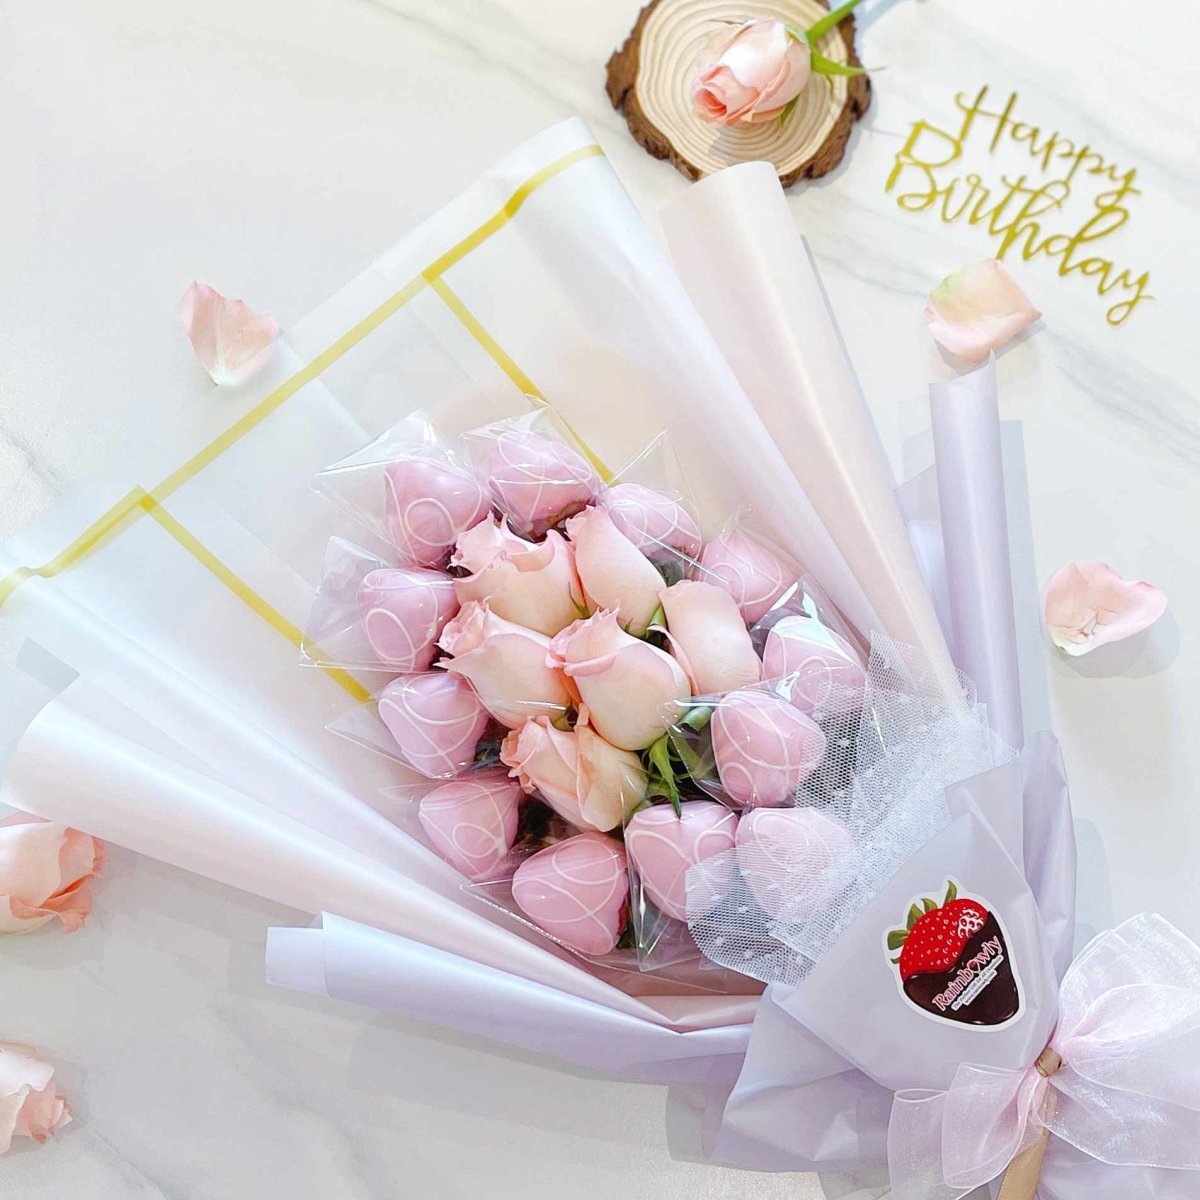 Flower Bouquet - Pinky Wish Chocoberry | Chocolate Dipped Strawberry Fresh Fruit Arrangement with Rose Flower Bouquet - Rainbowly Fresh Fruit Gift and Flower Arrangments